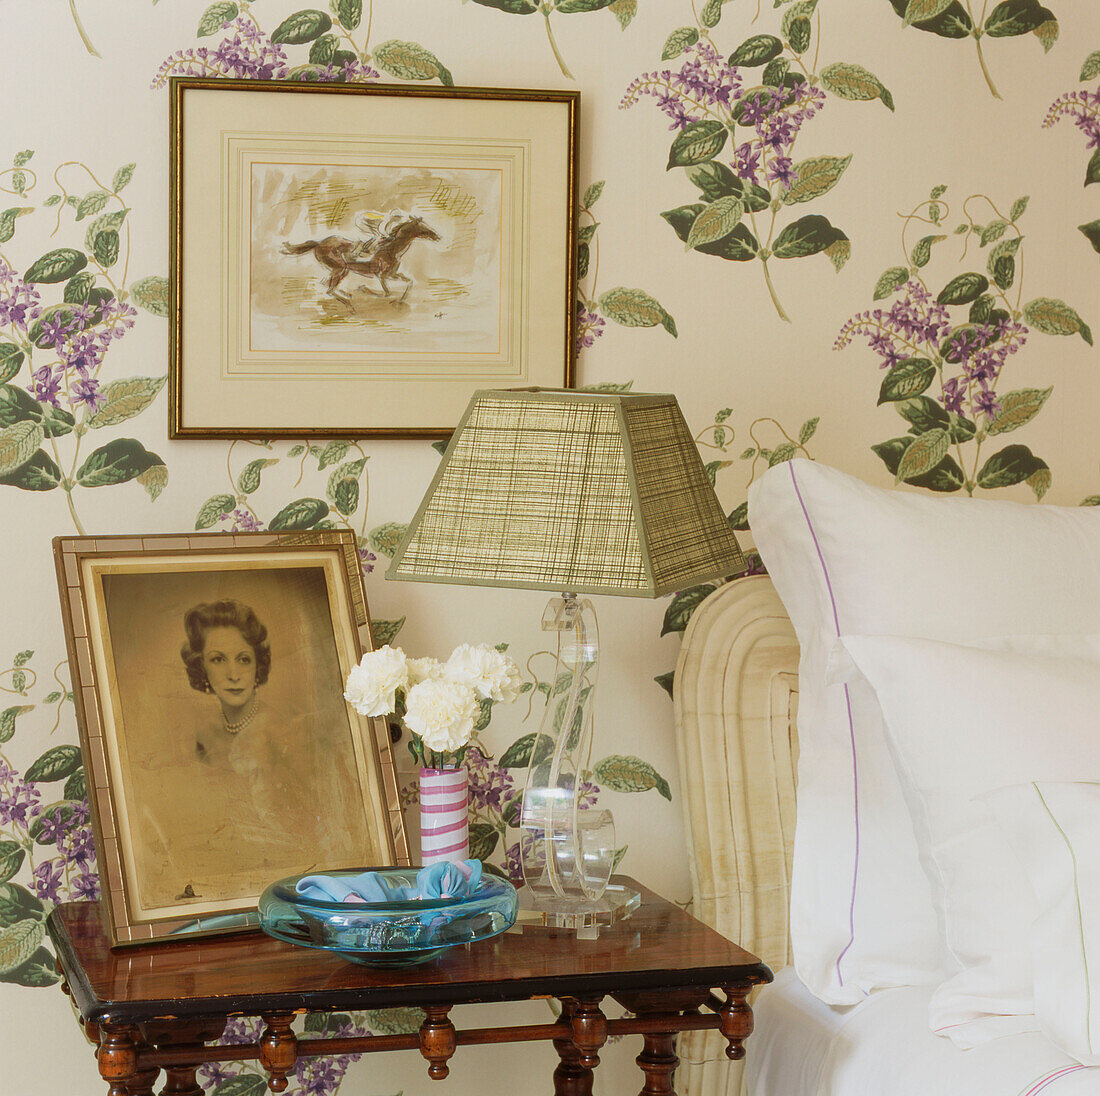 Bedroom detail with pretty floral pattern wallpaper and bedside table